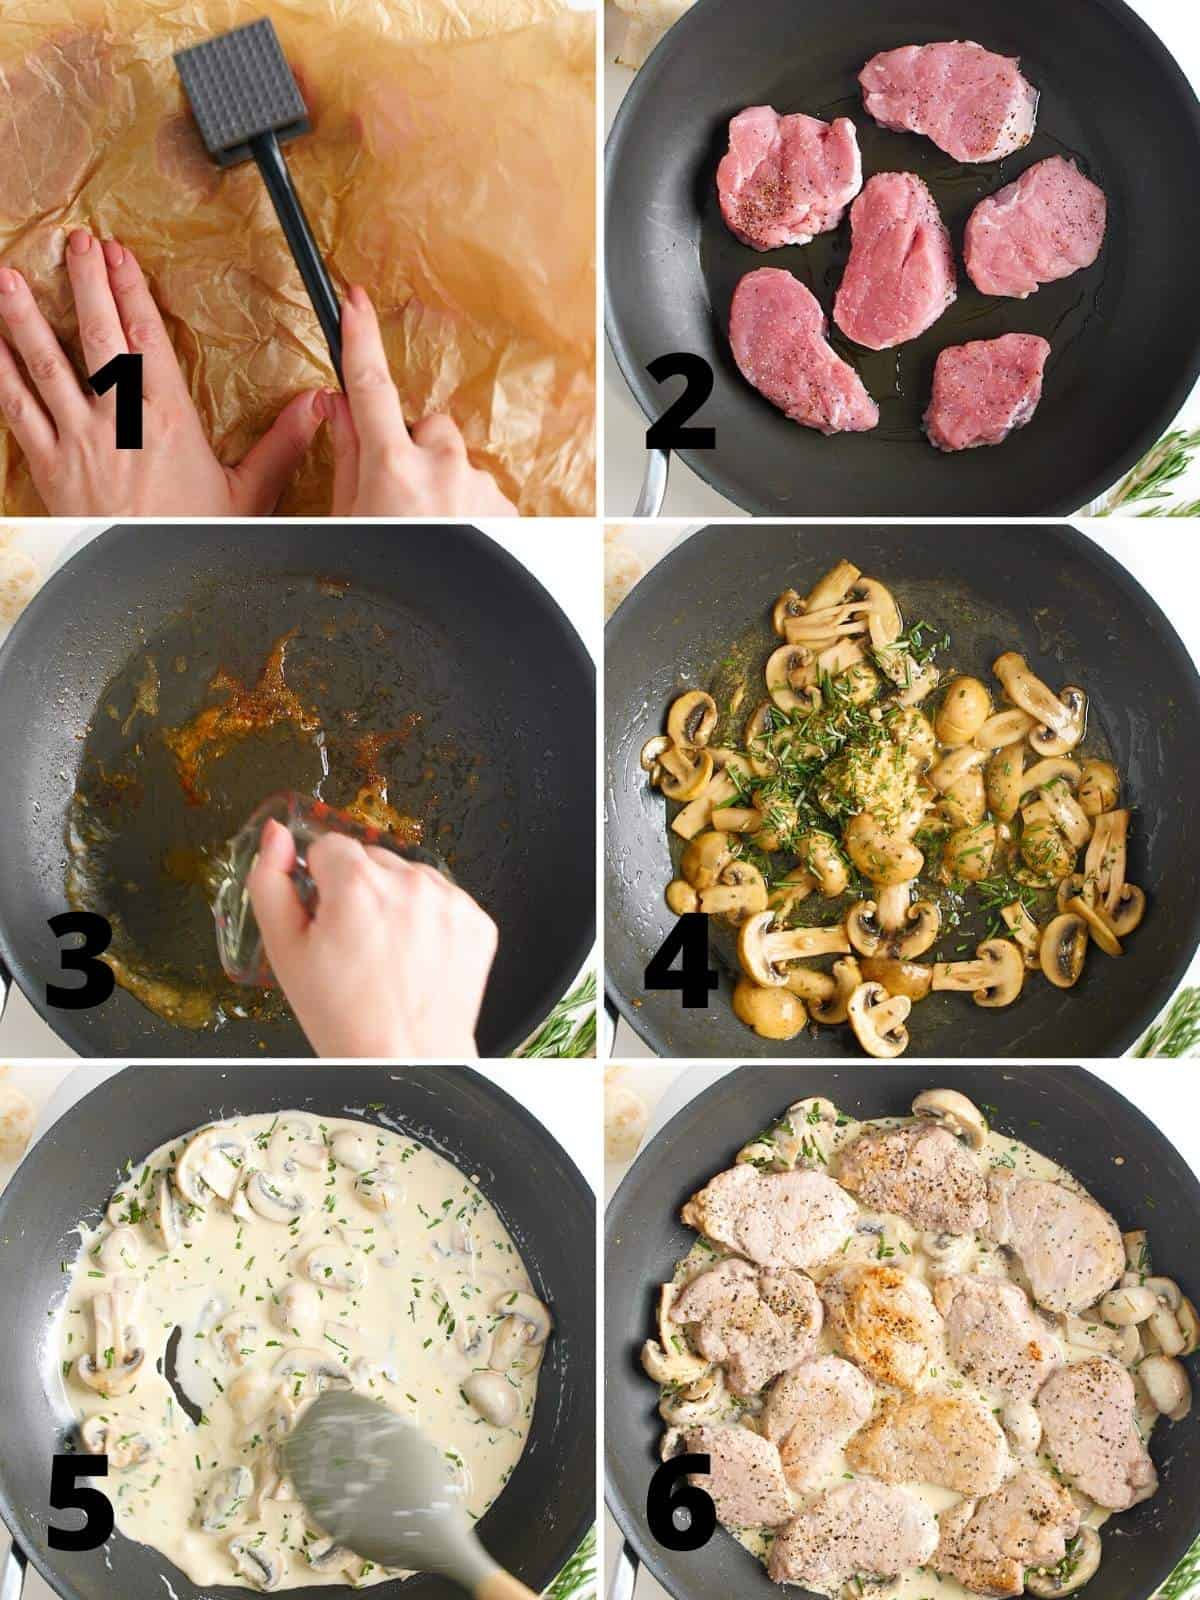 A collage of 6 images showing the steps for making pork medallions. 